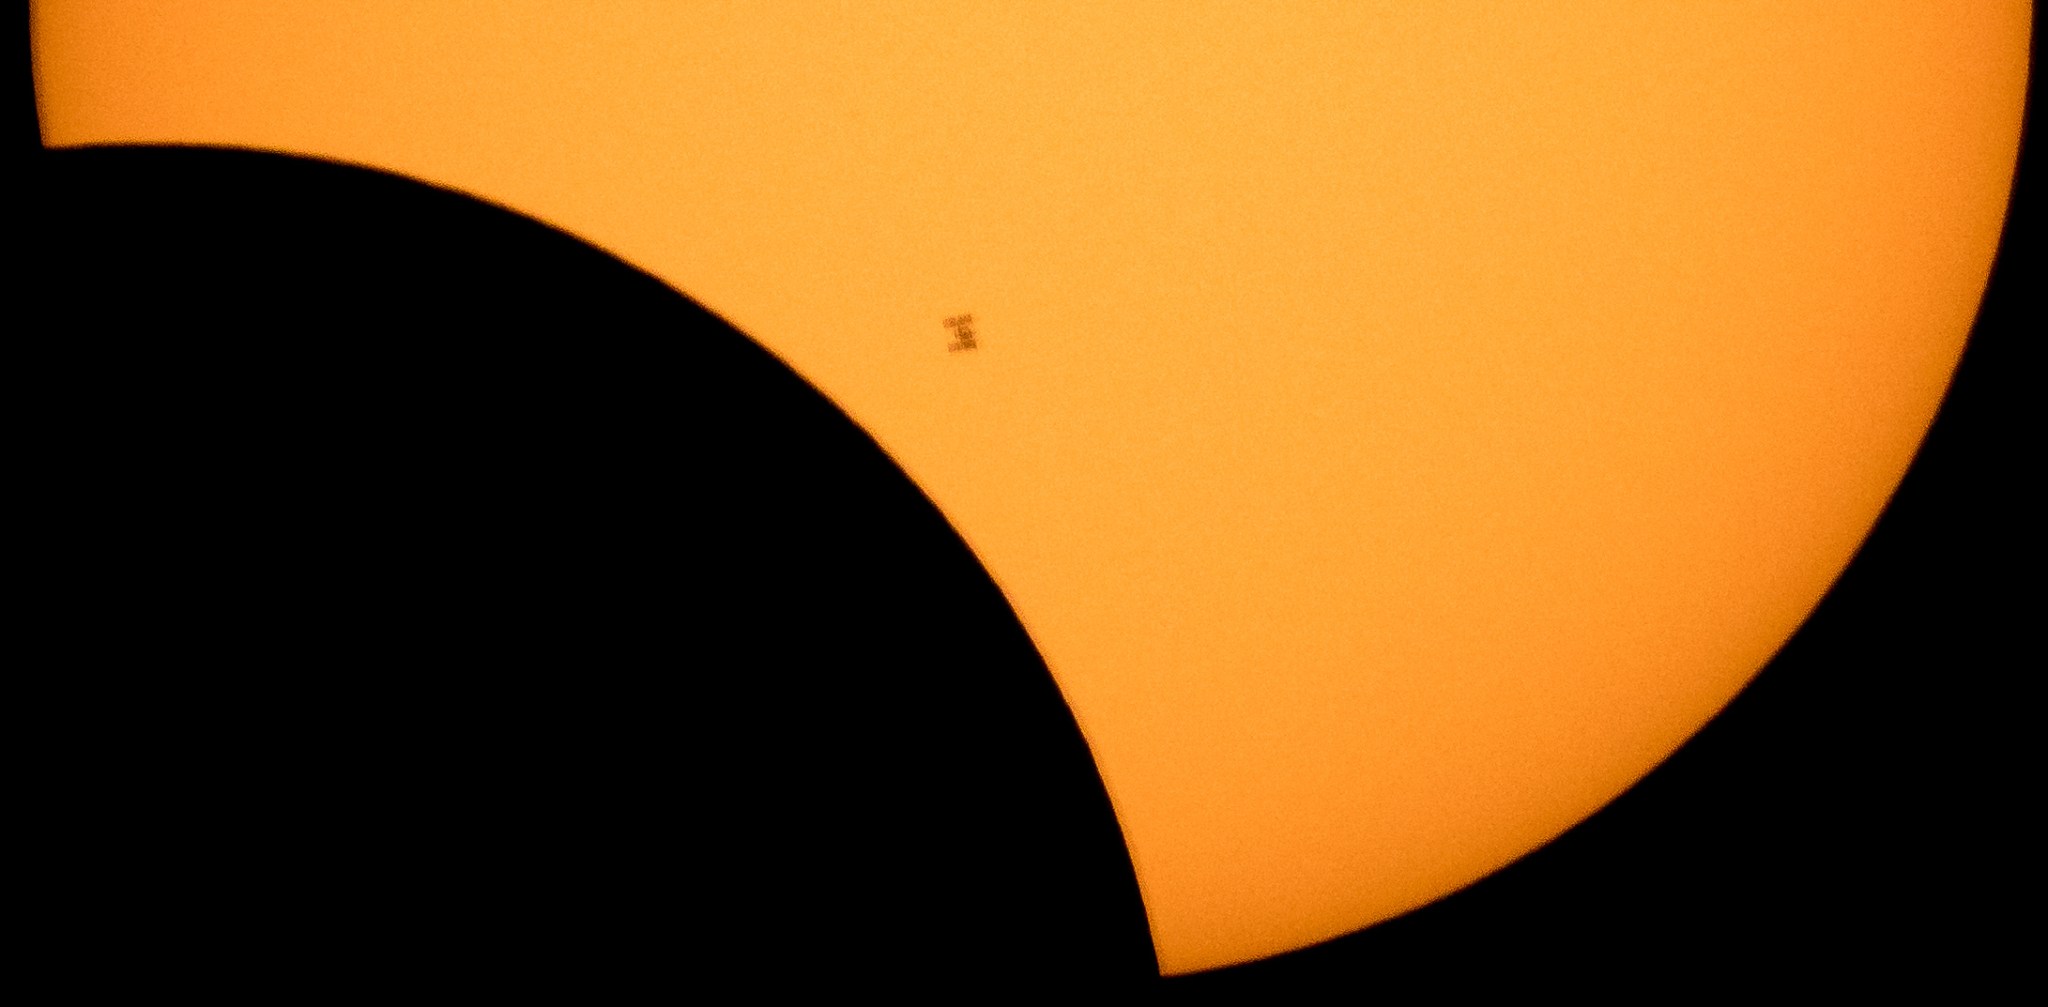 The International Space Station, with a crew of six onboard, is seen in silhouette as it transits the Sun 